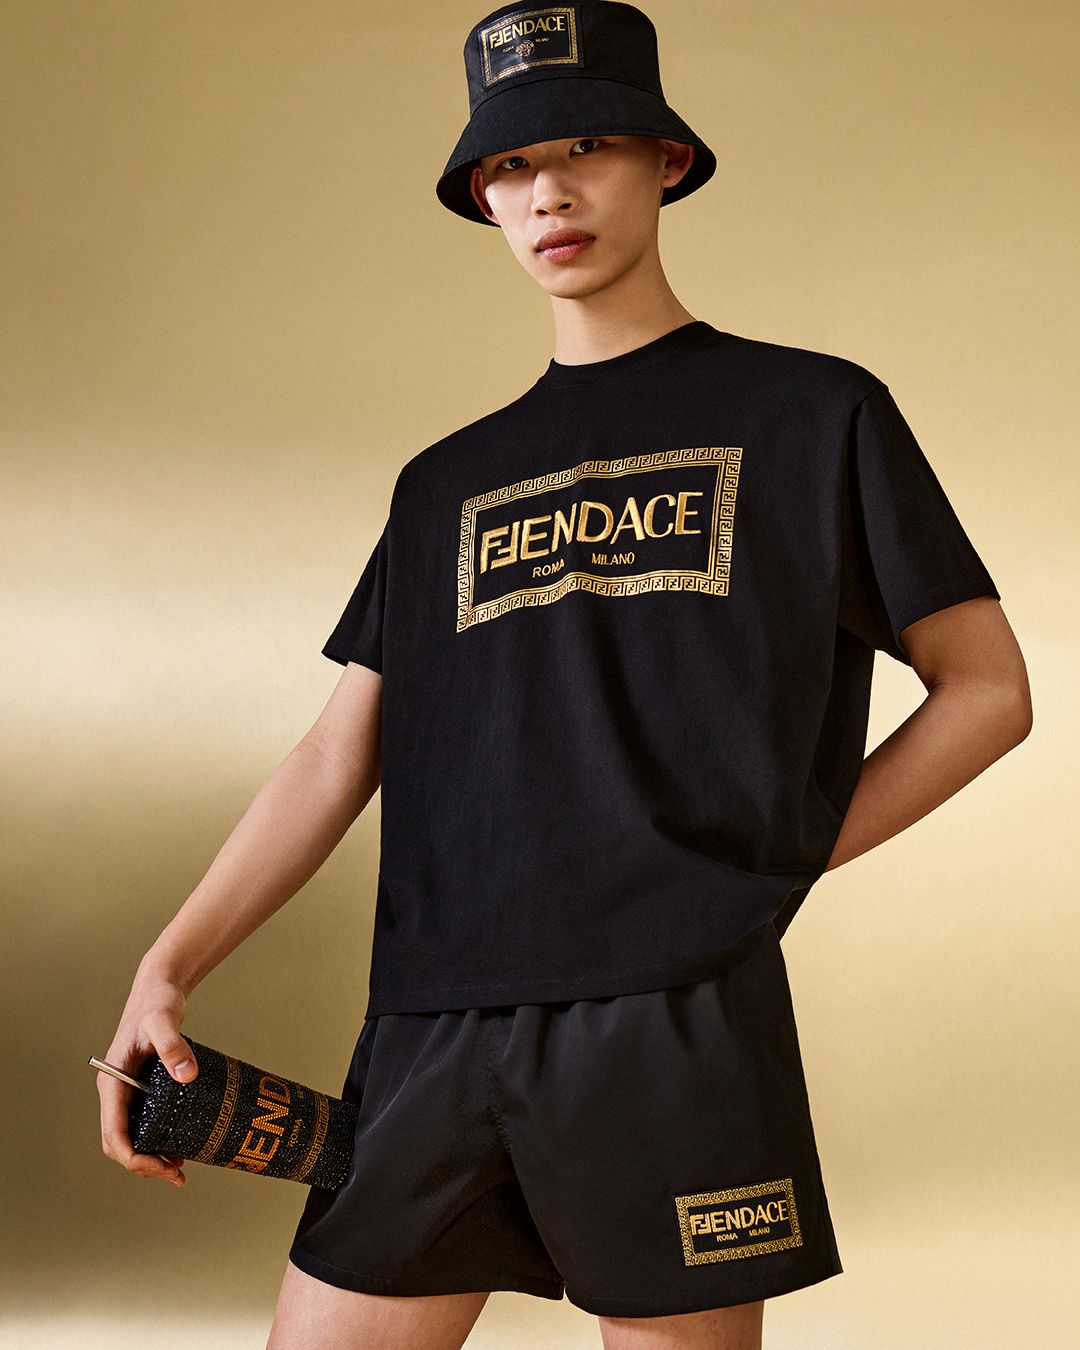 Fendi and Versace Fendace Collection Pricing and Where to Buy